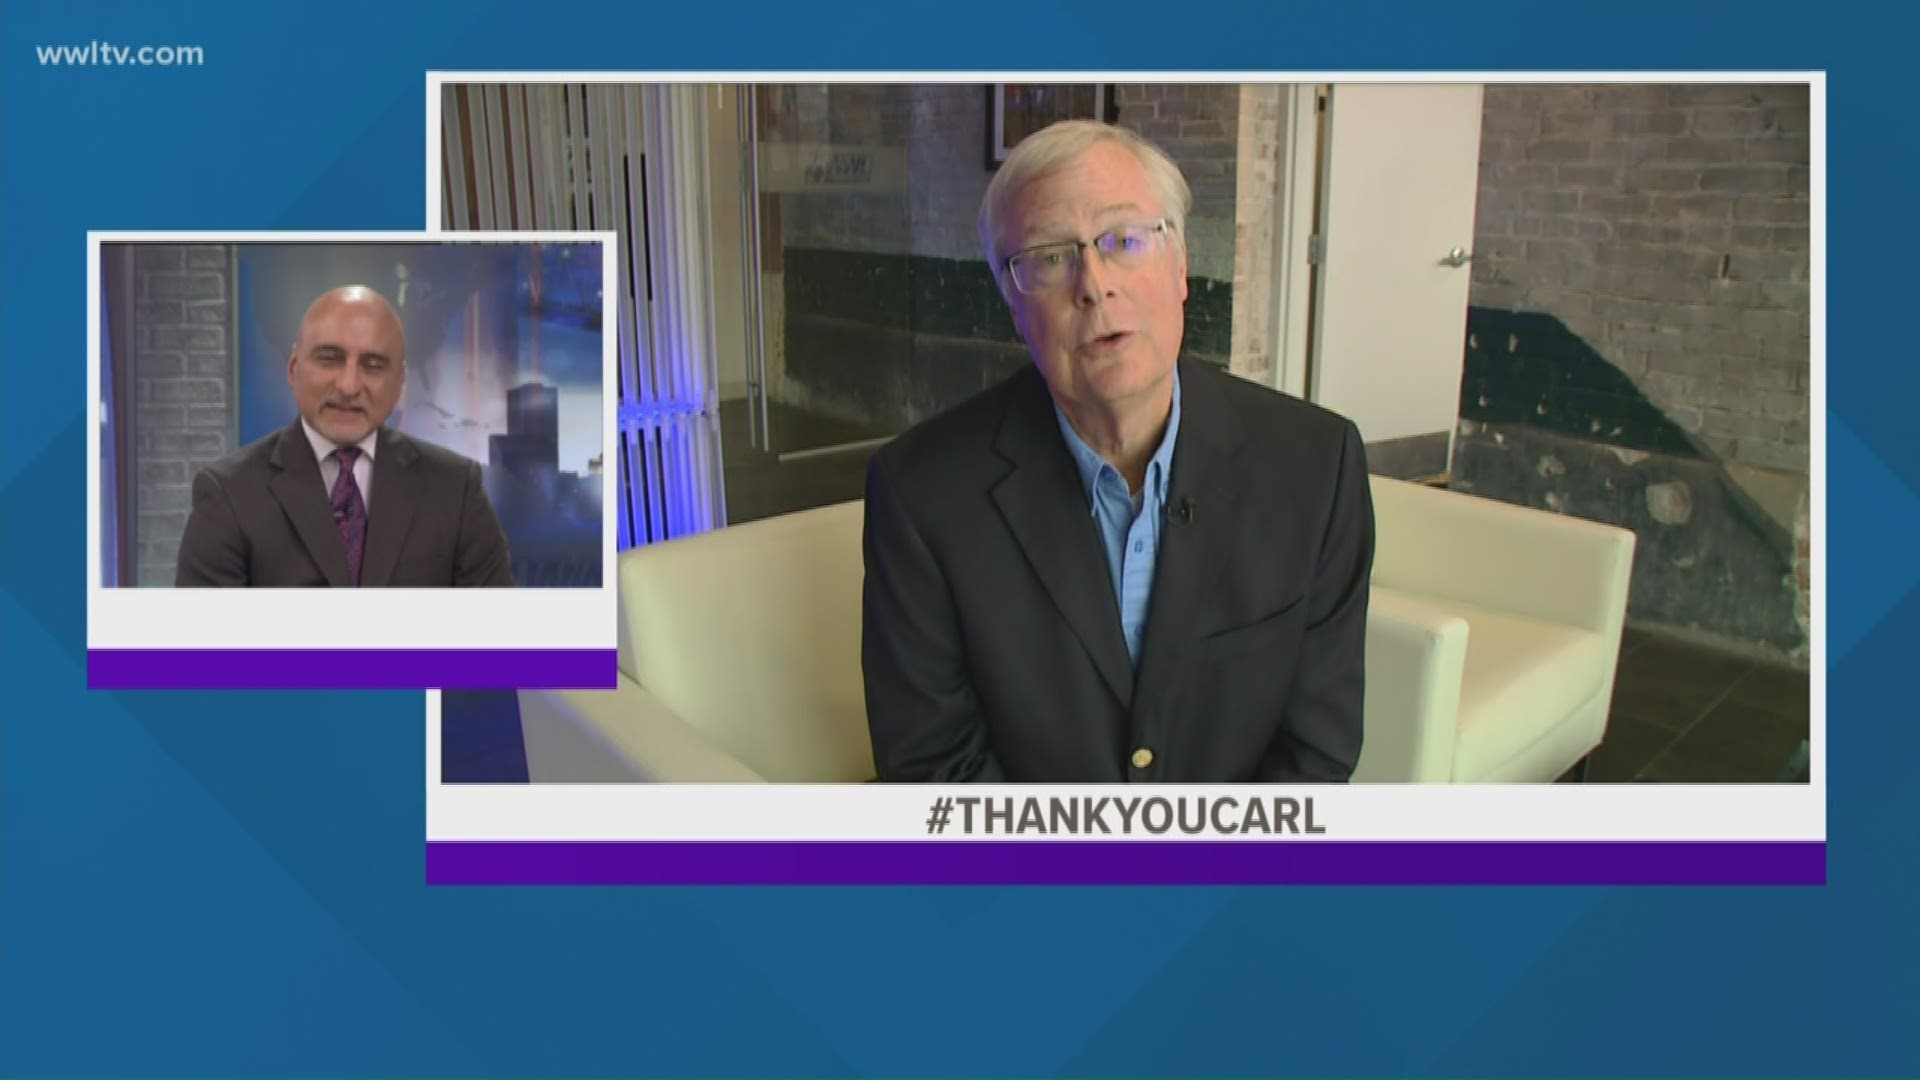 Some of Carl's closest colleagues say #ThankYouCarl on his last day at WWL-TV.